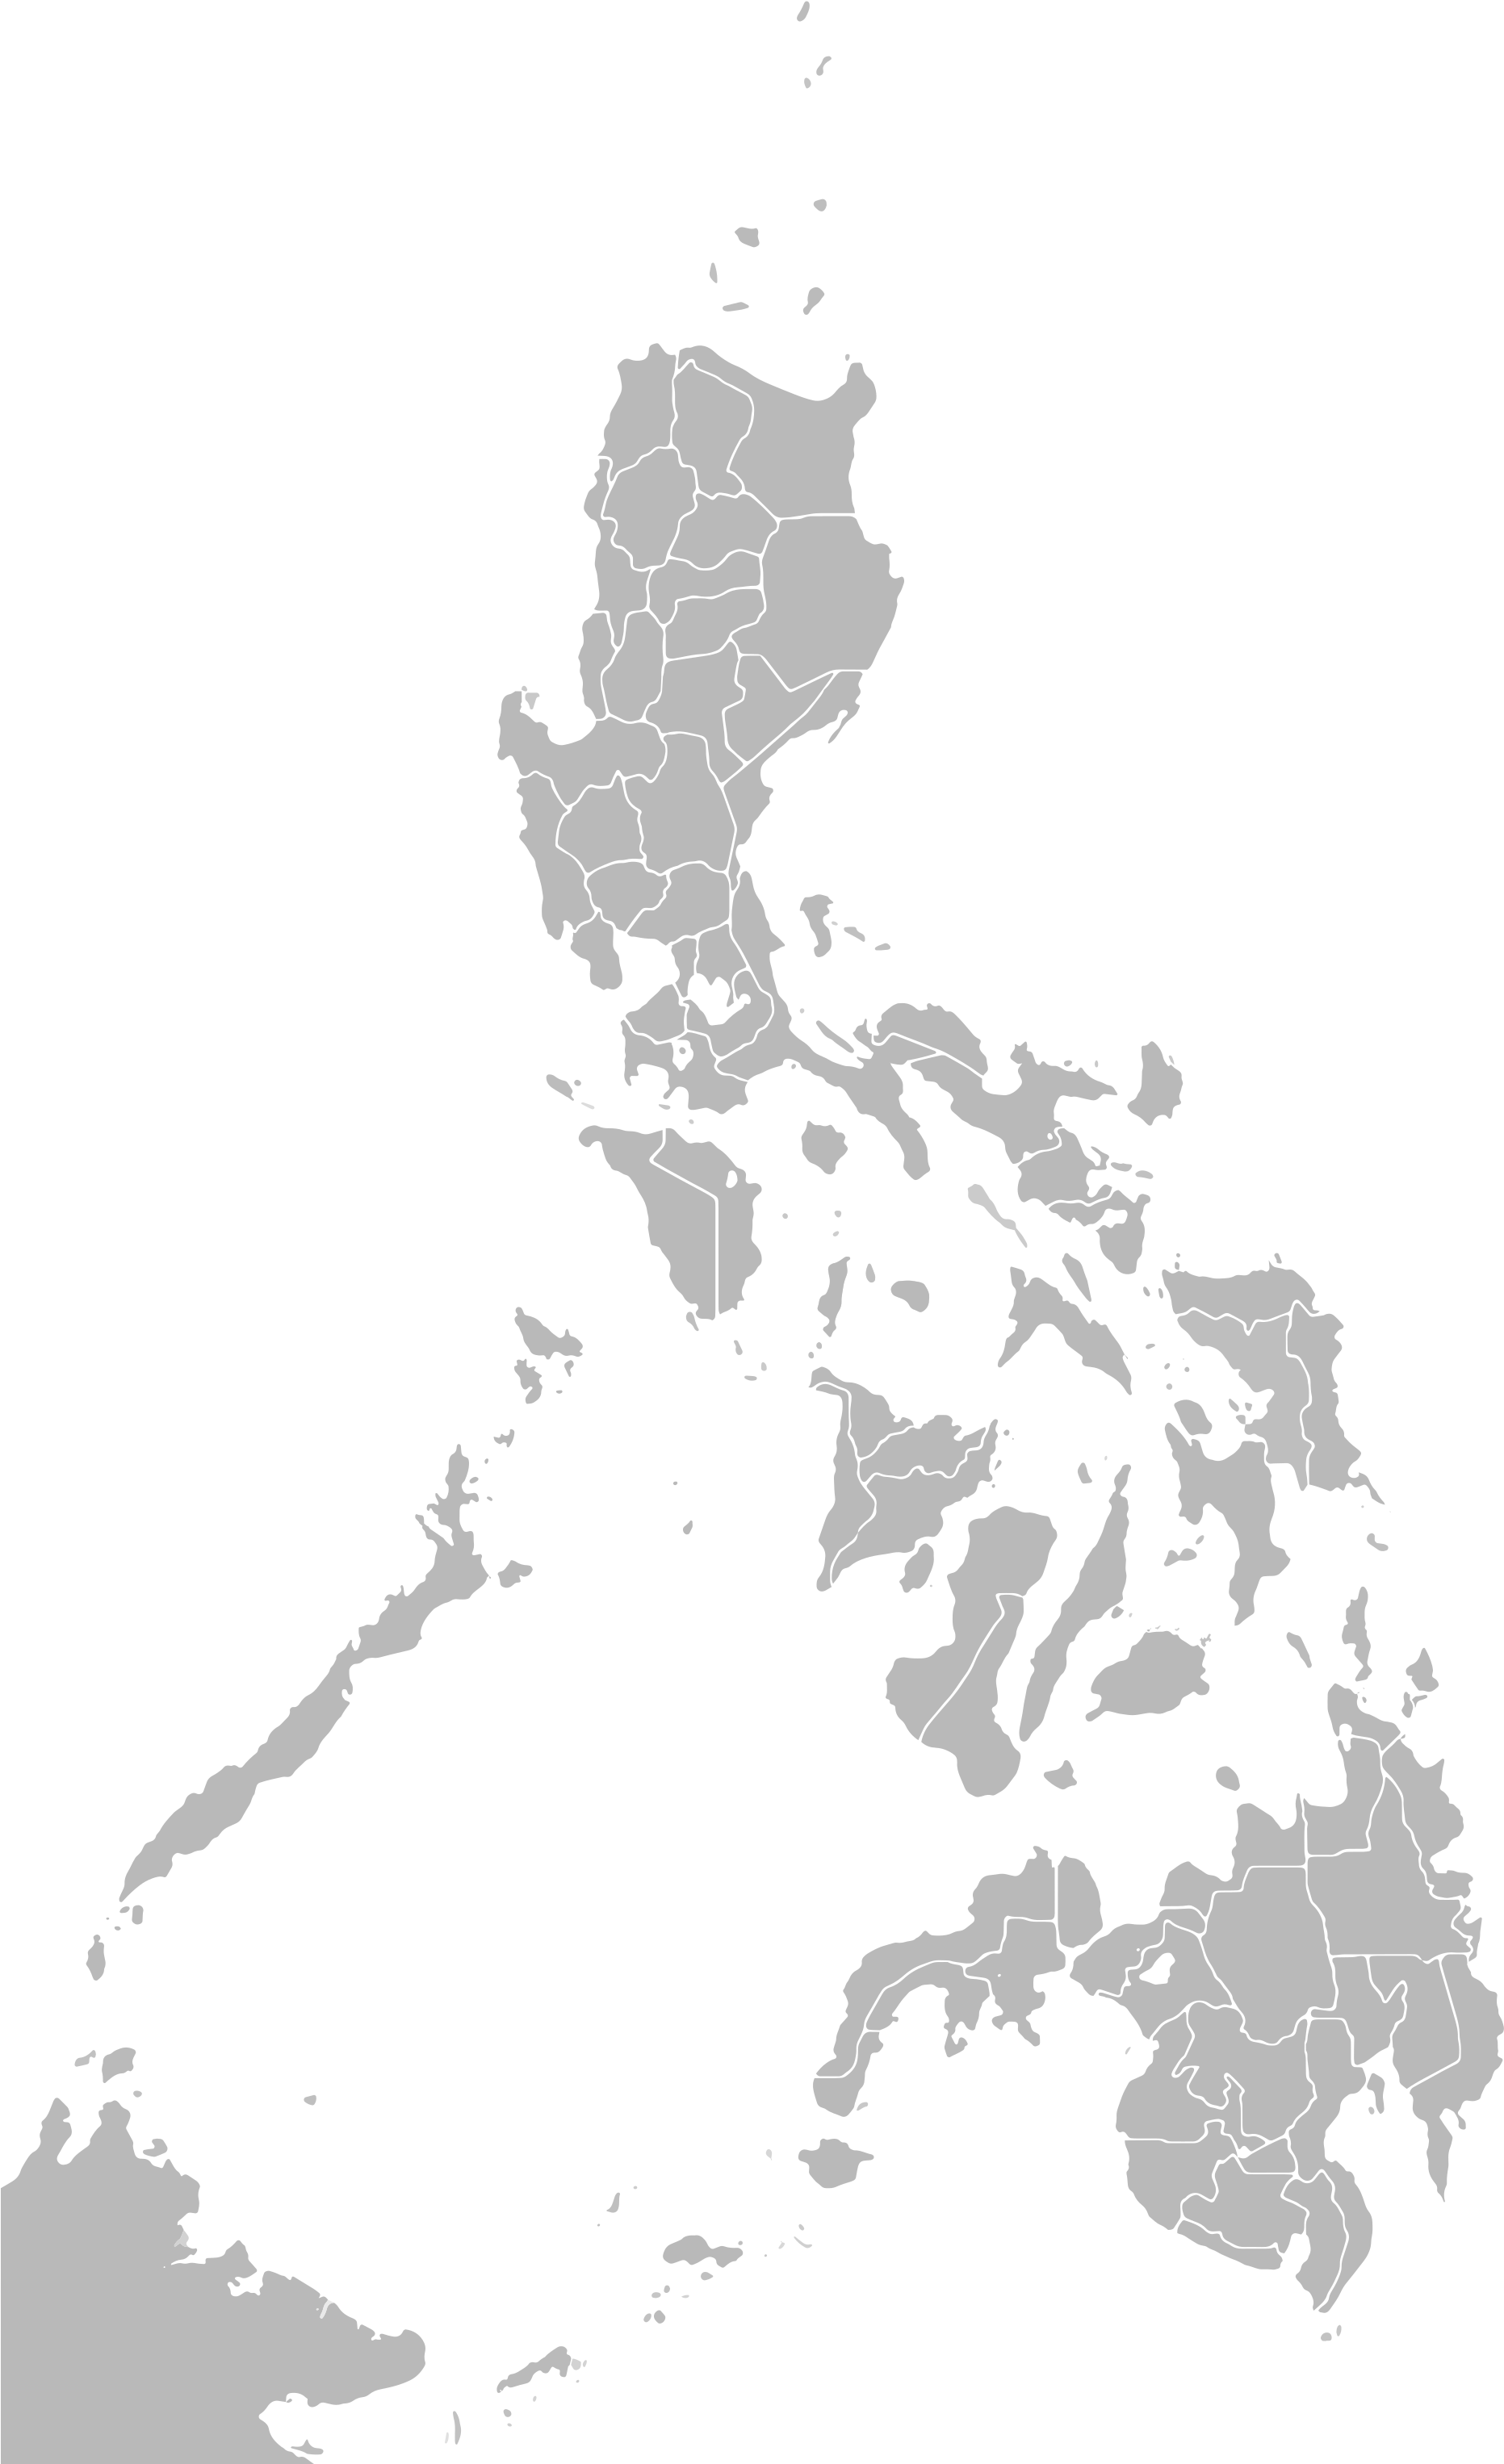 Philippines Map Silhouette